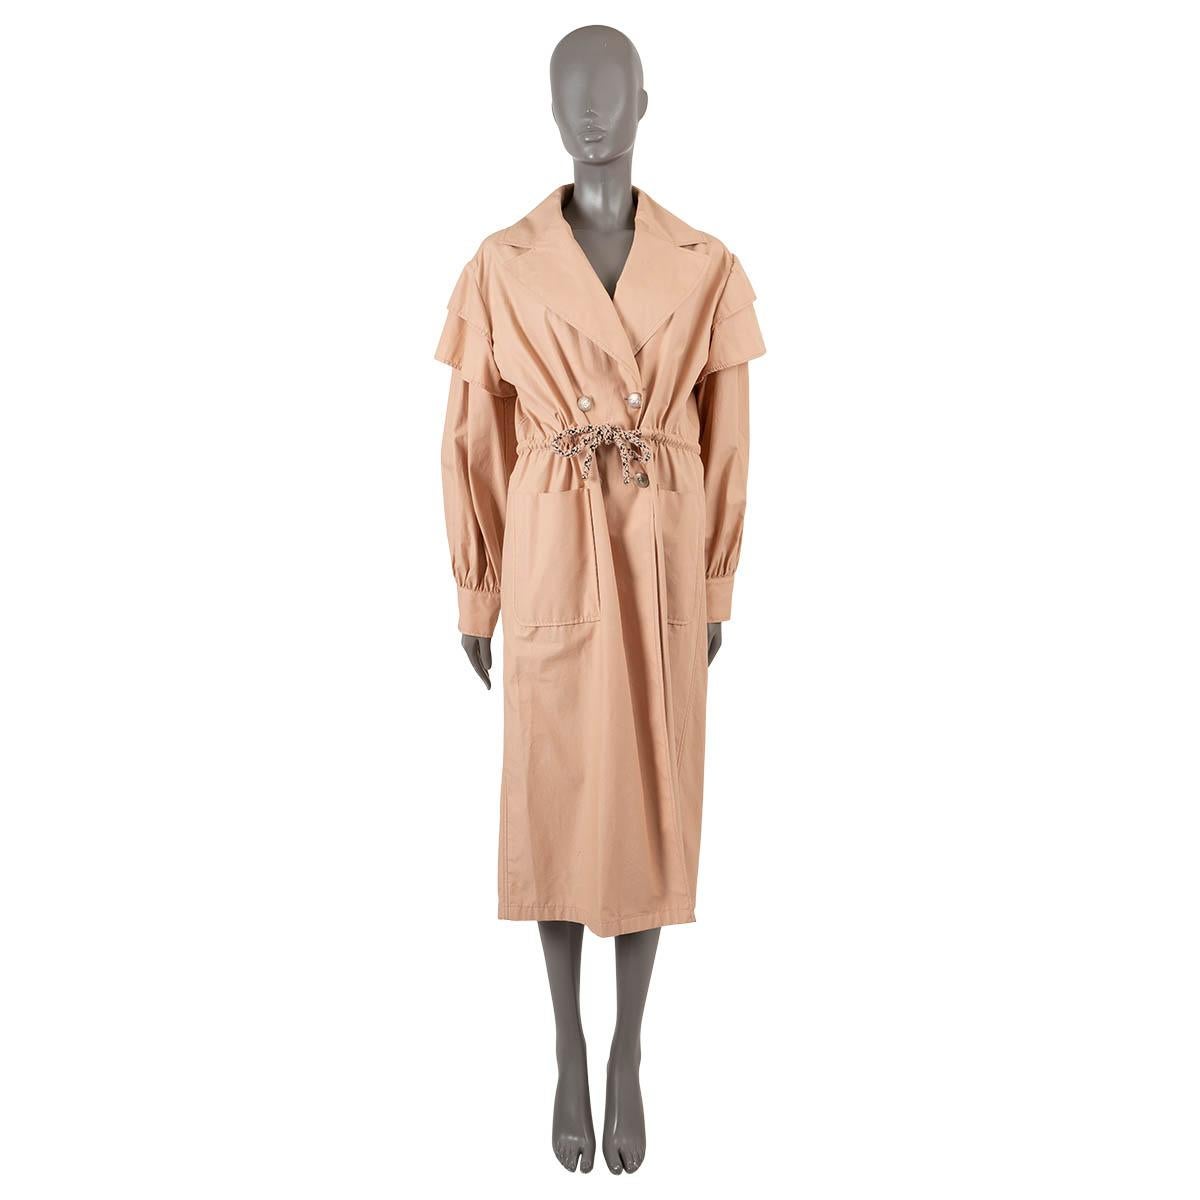 100% authentic Chanel double-breasted trench coat in blush pink cotton (100%). Features ruffled shoulders, peak lapels, drawstring waist and two patch pokcets on the front. Closes with CC buttons on the front. Unlined. Has been worn and is in